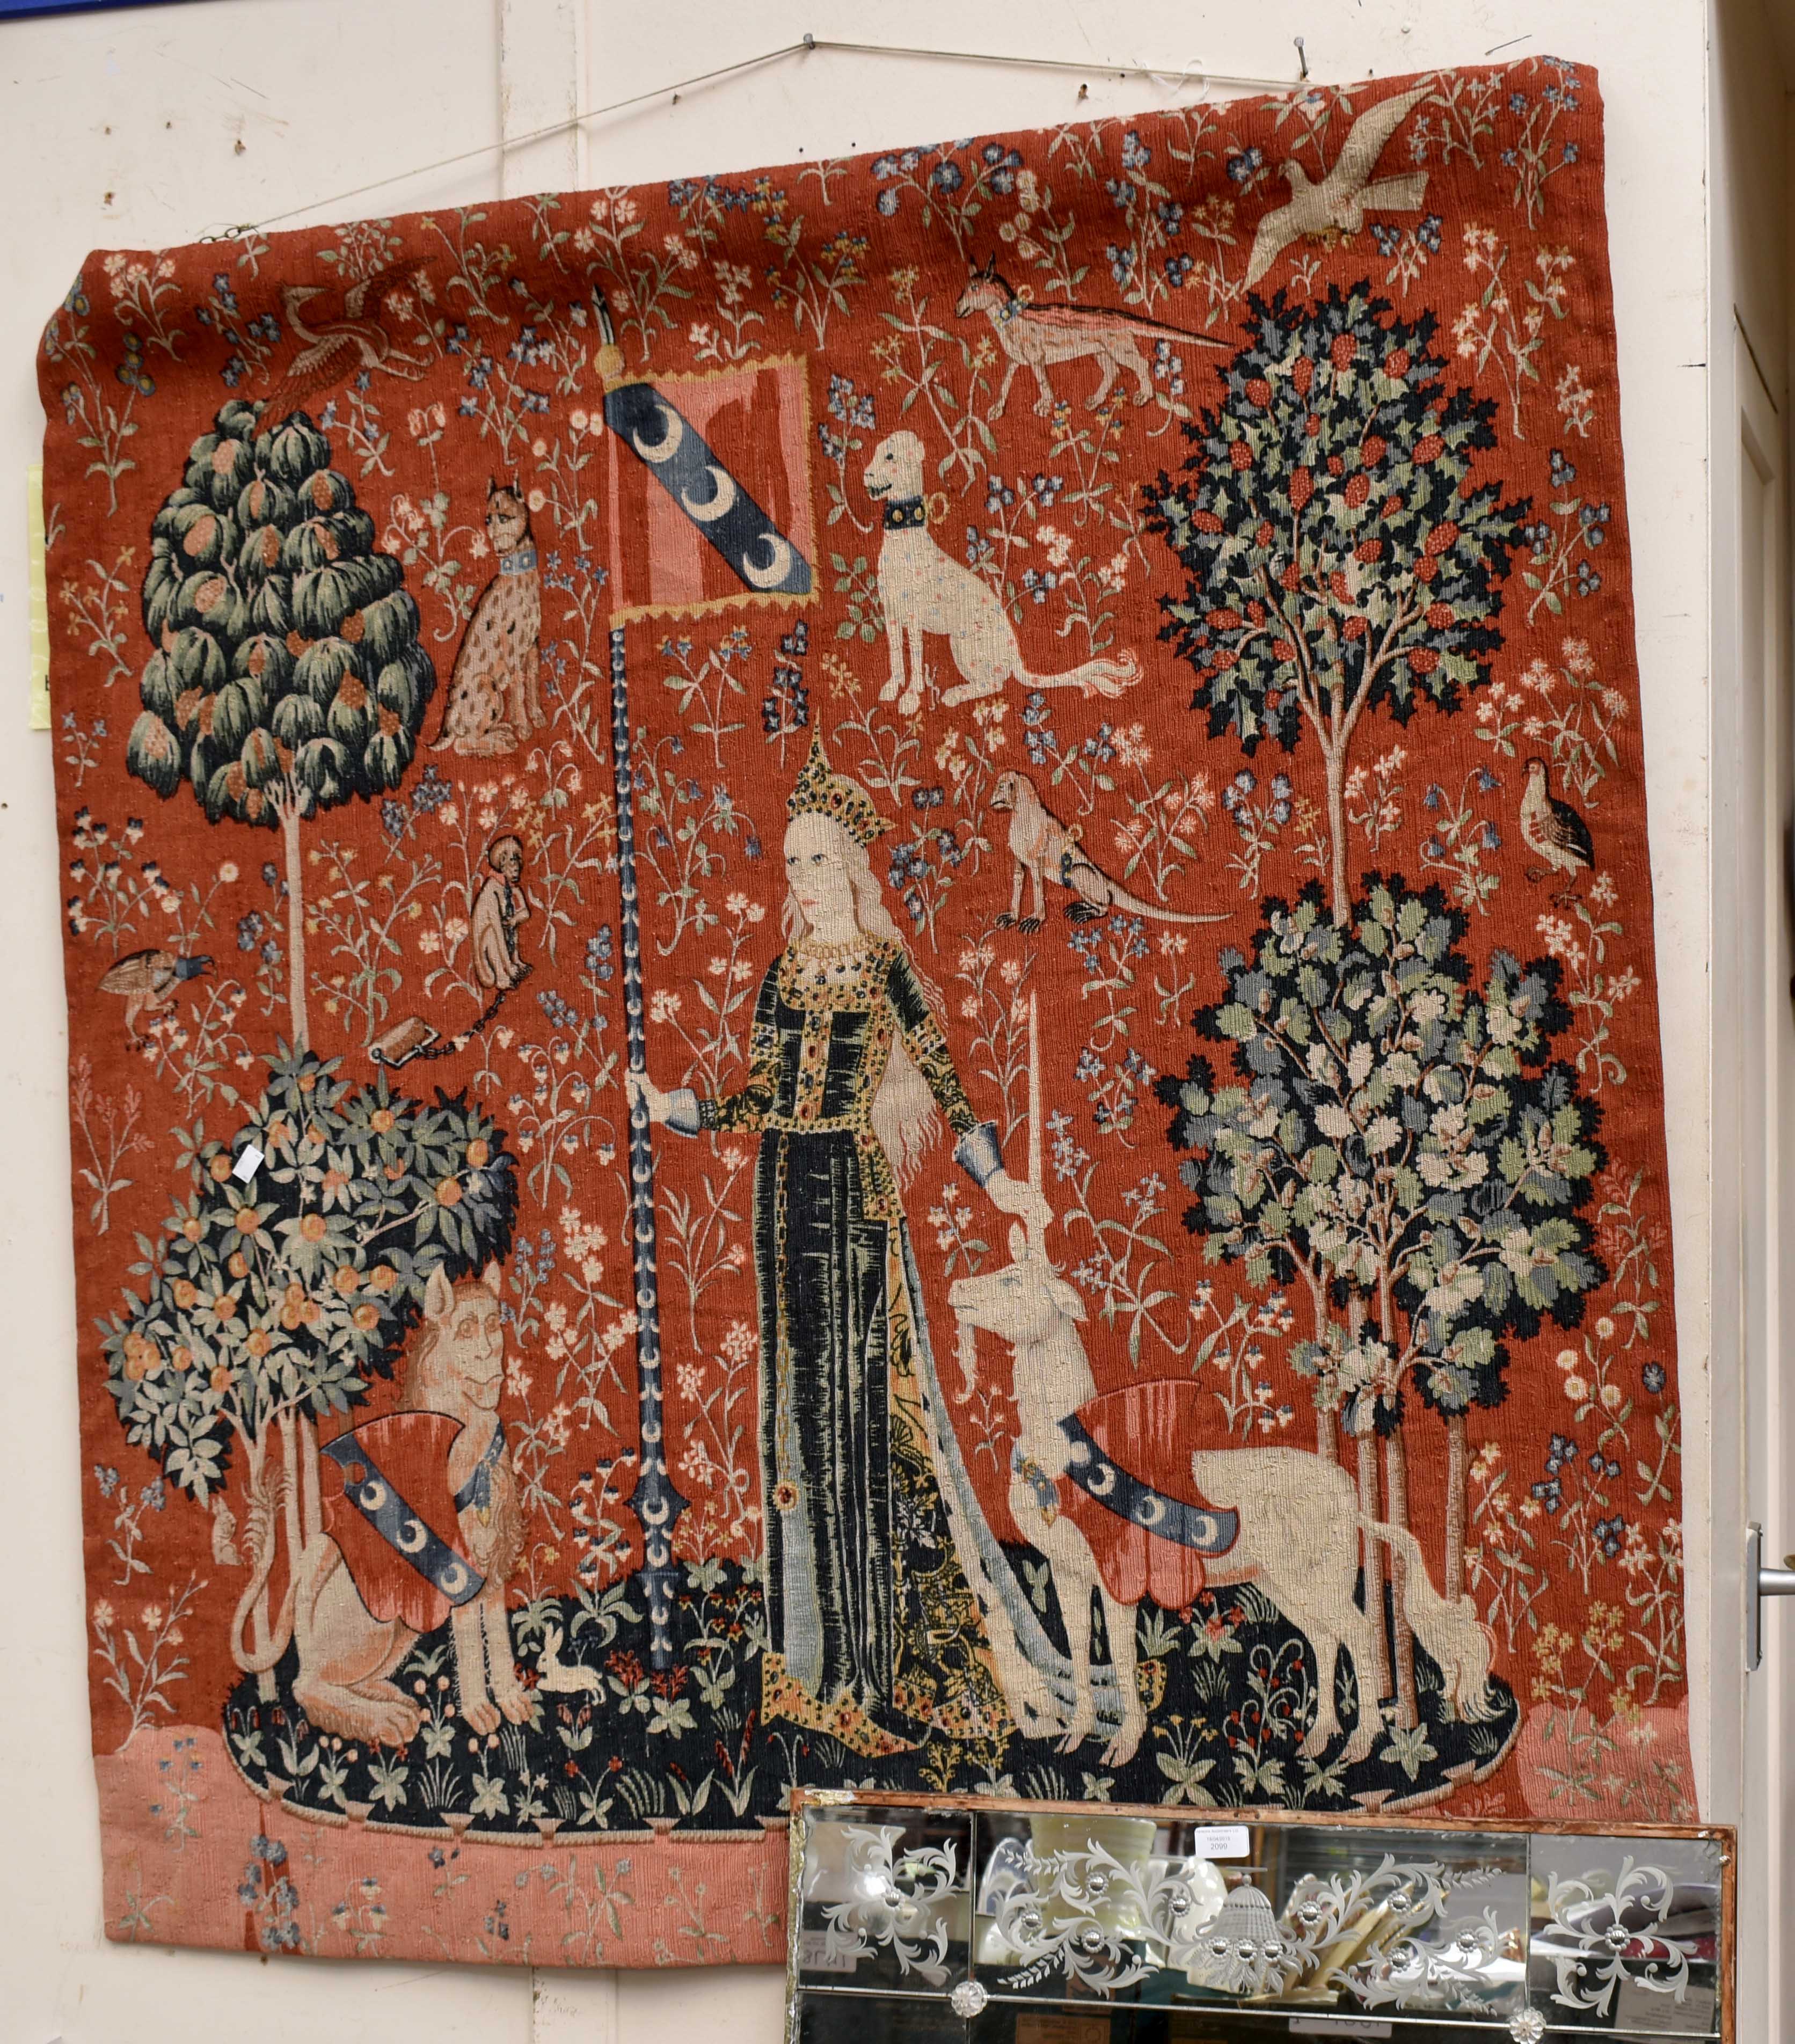 A reproduction wall hanging The Lady and the Unicorn based on the French medieval legend